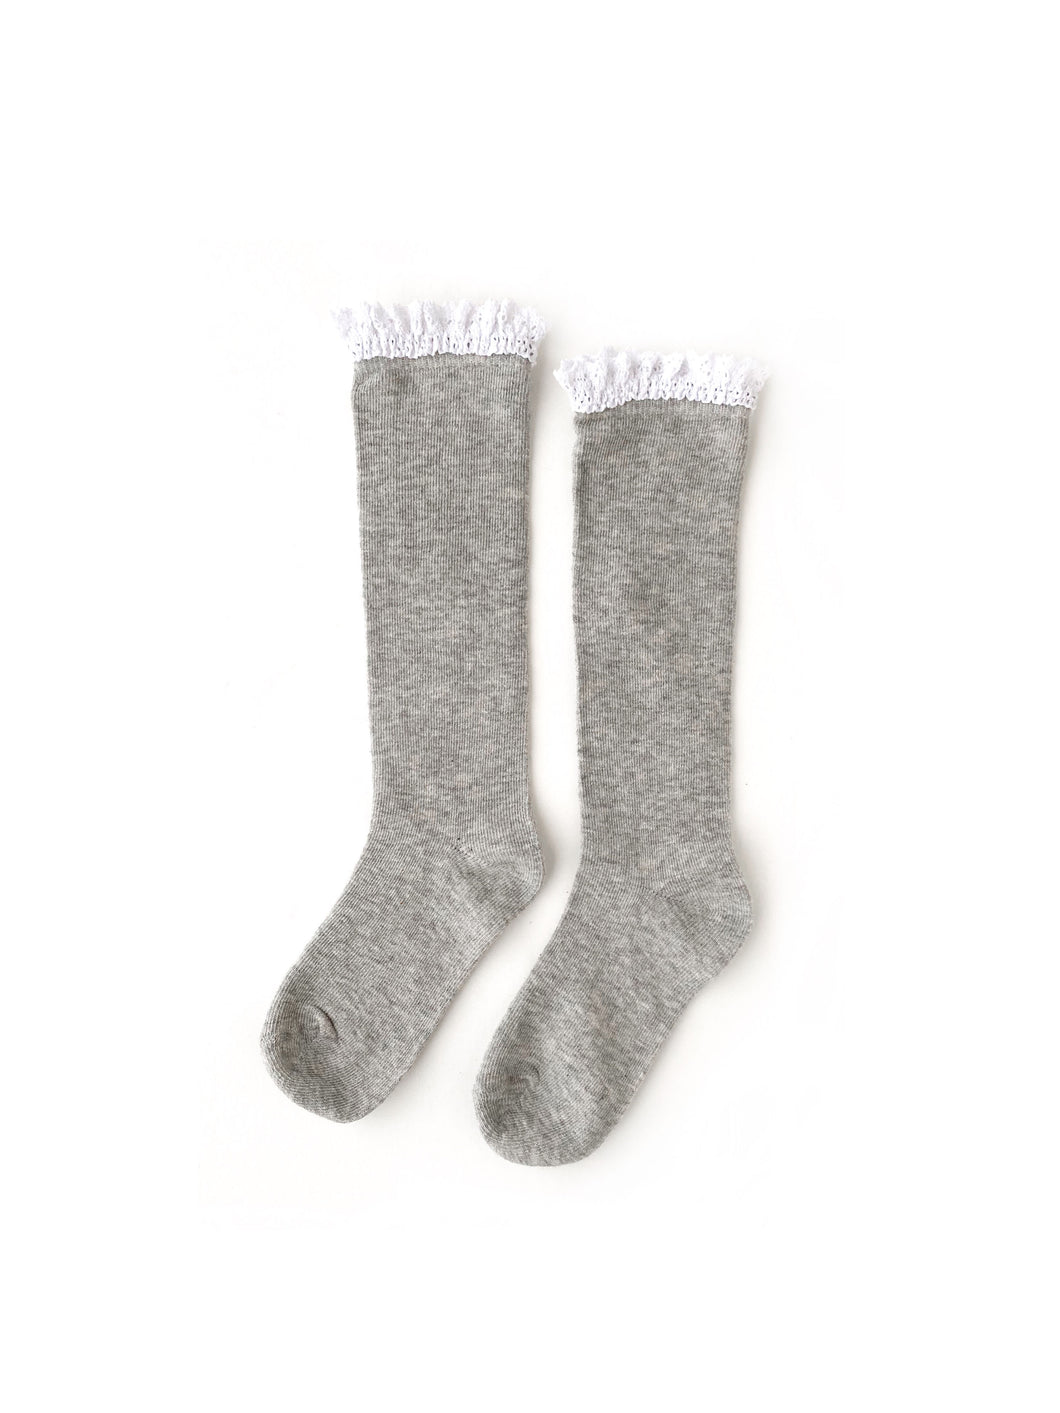 Little Stocking Co. Gray + White Lace Top Knee Highs